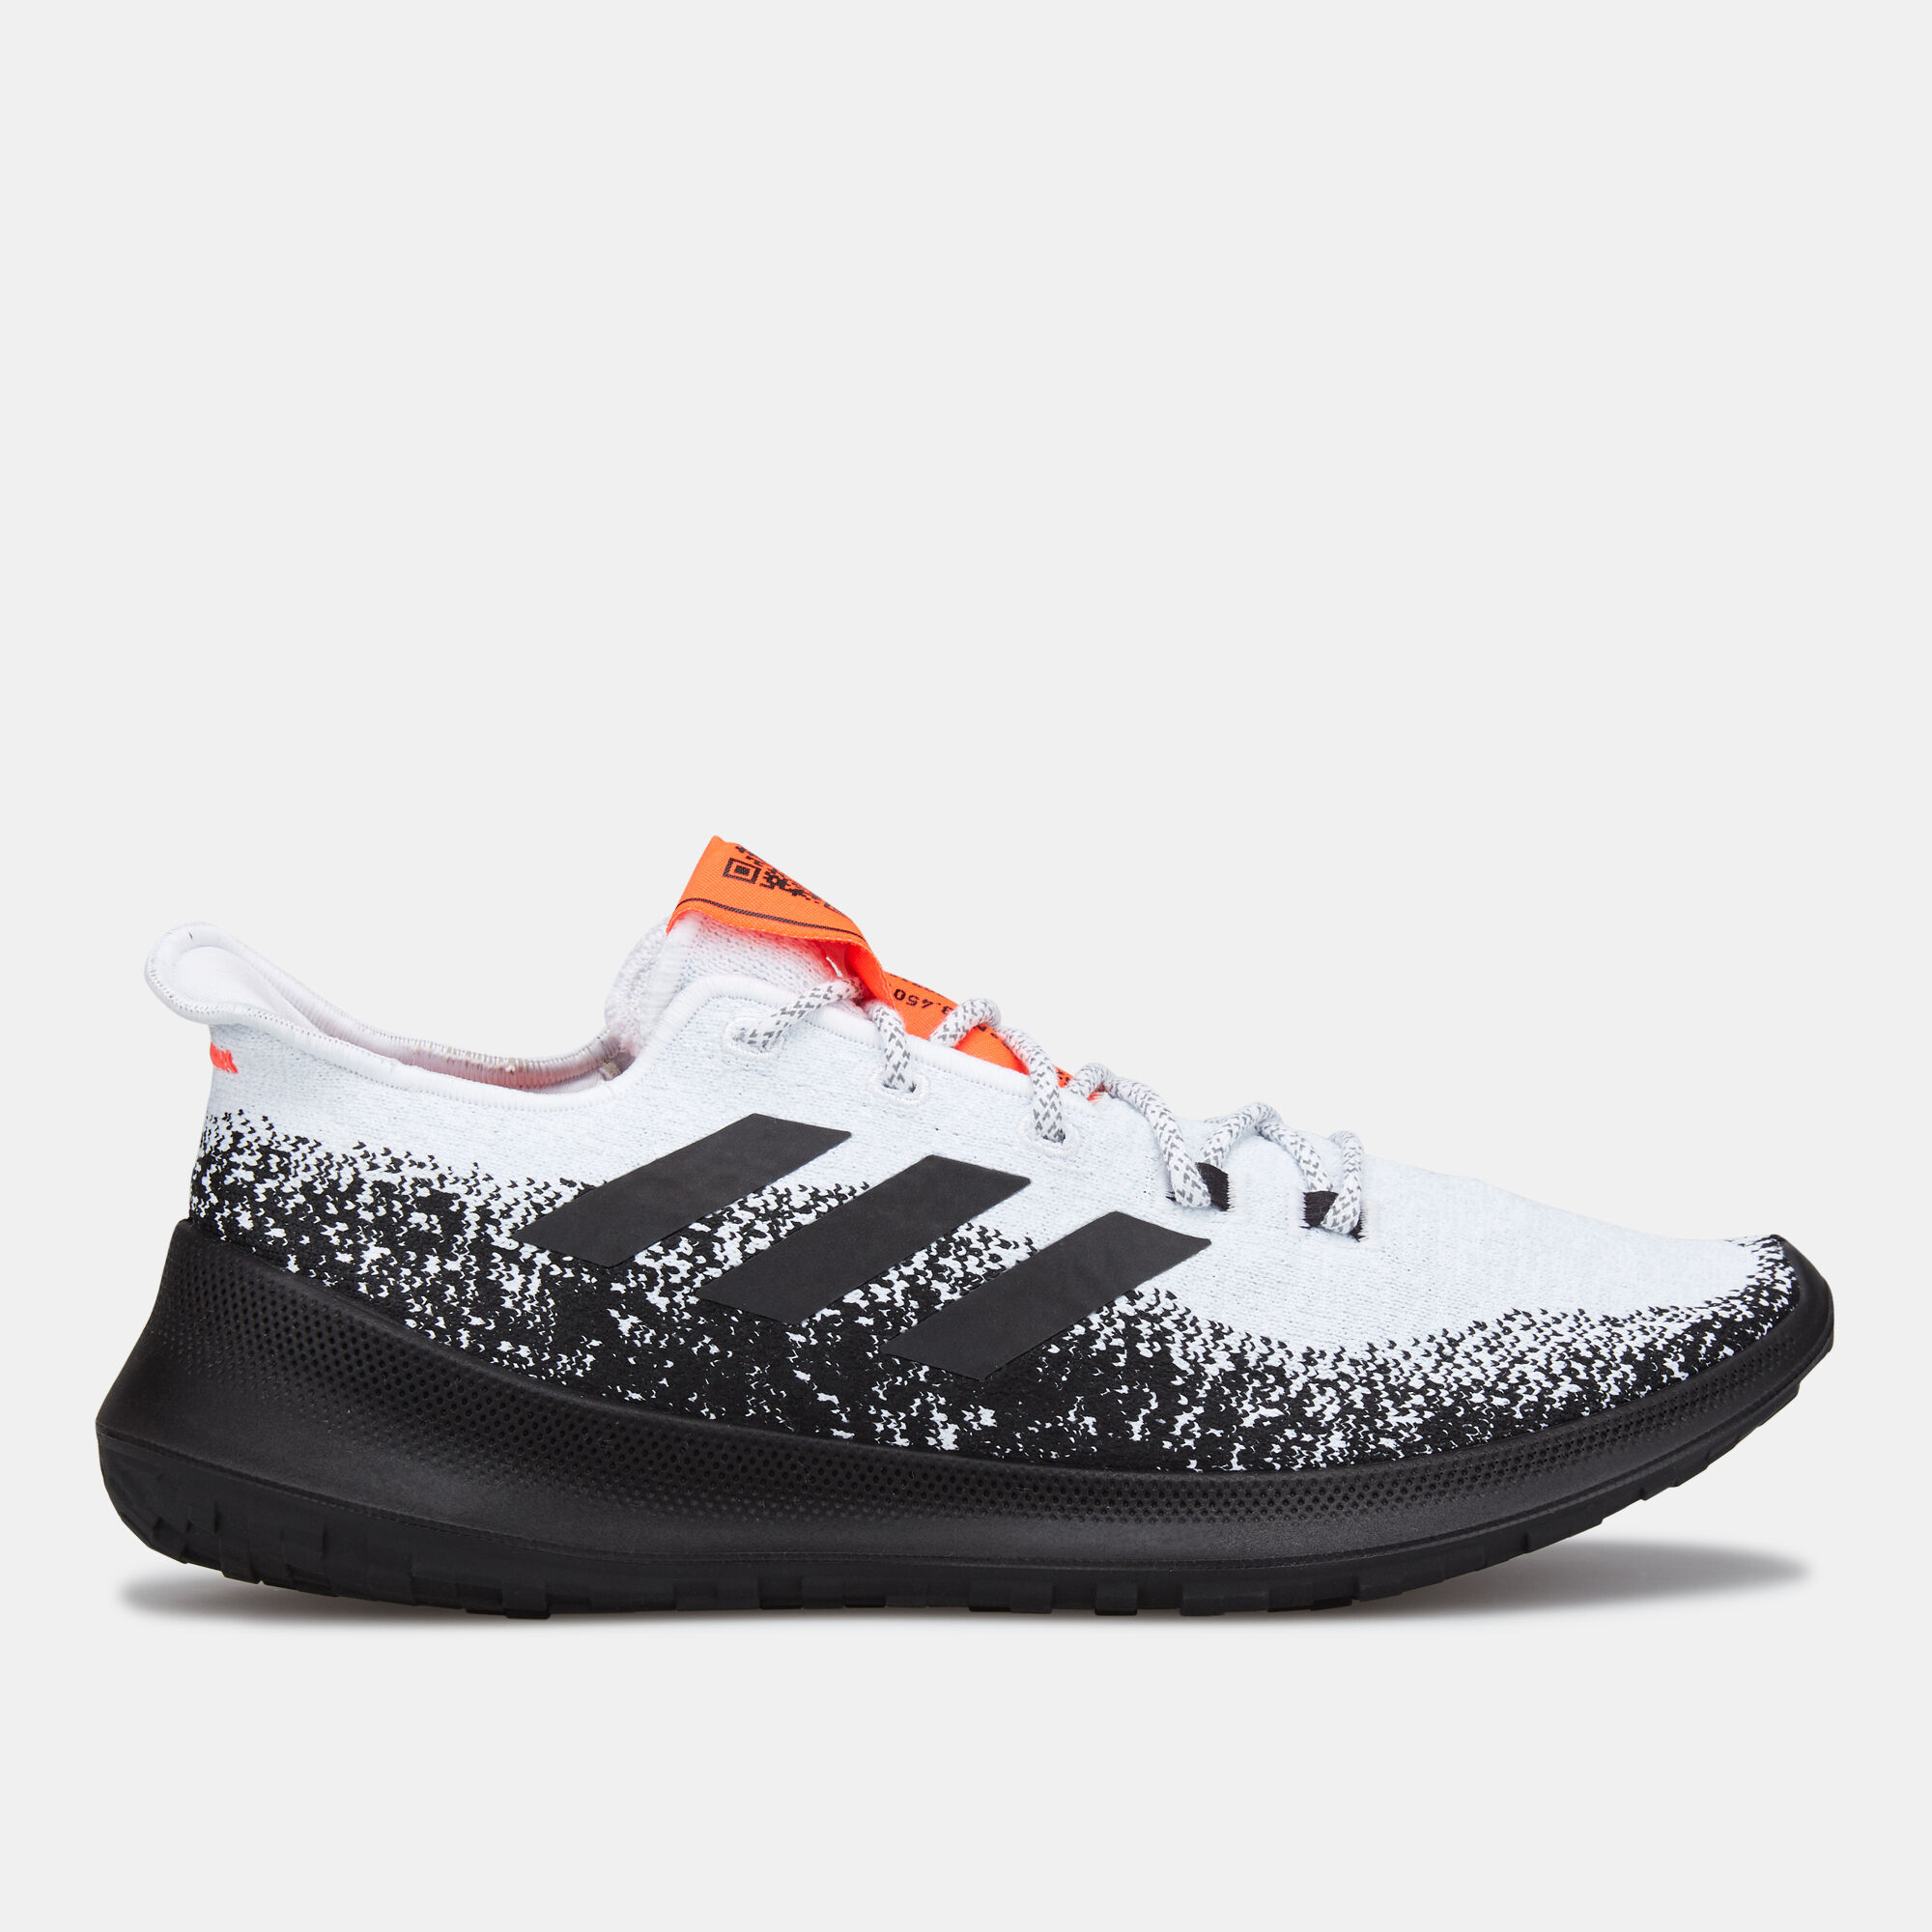 adidas shoes online store